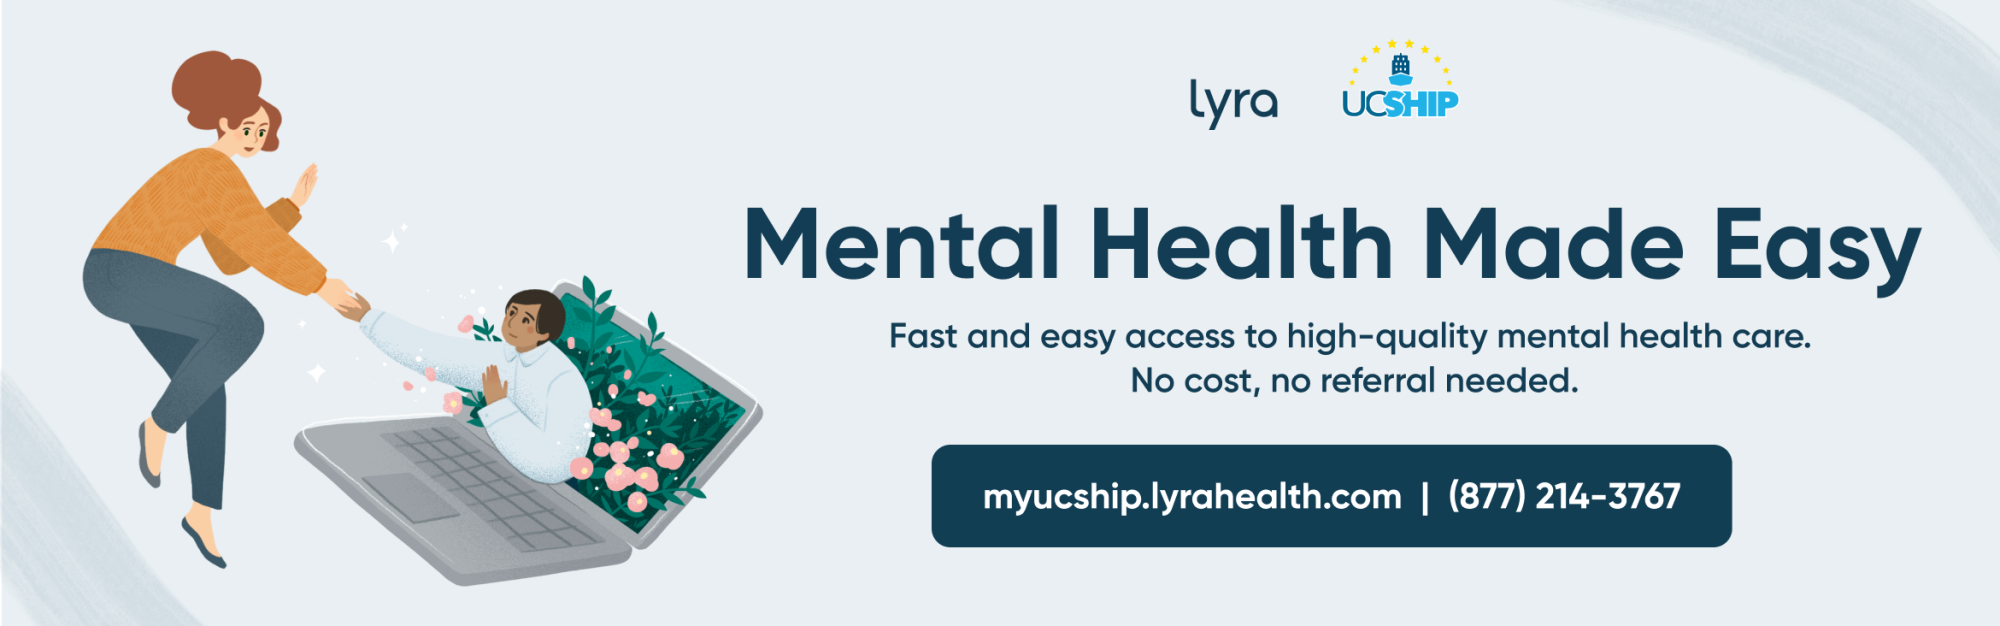 Lyra for UC Ship Students- Mental Health Made Easy